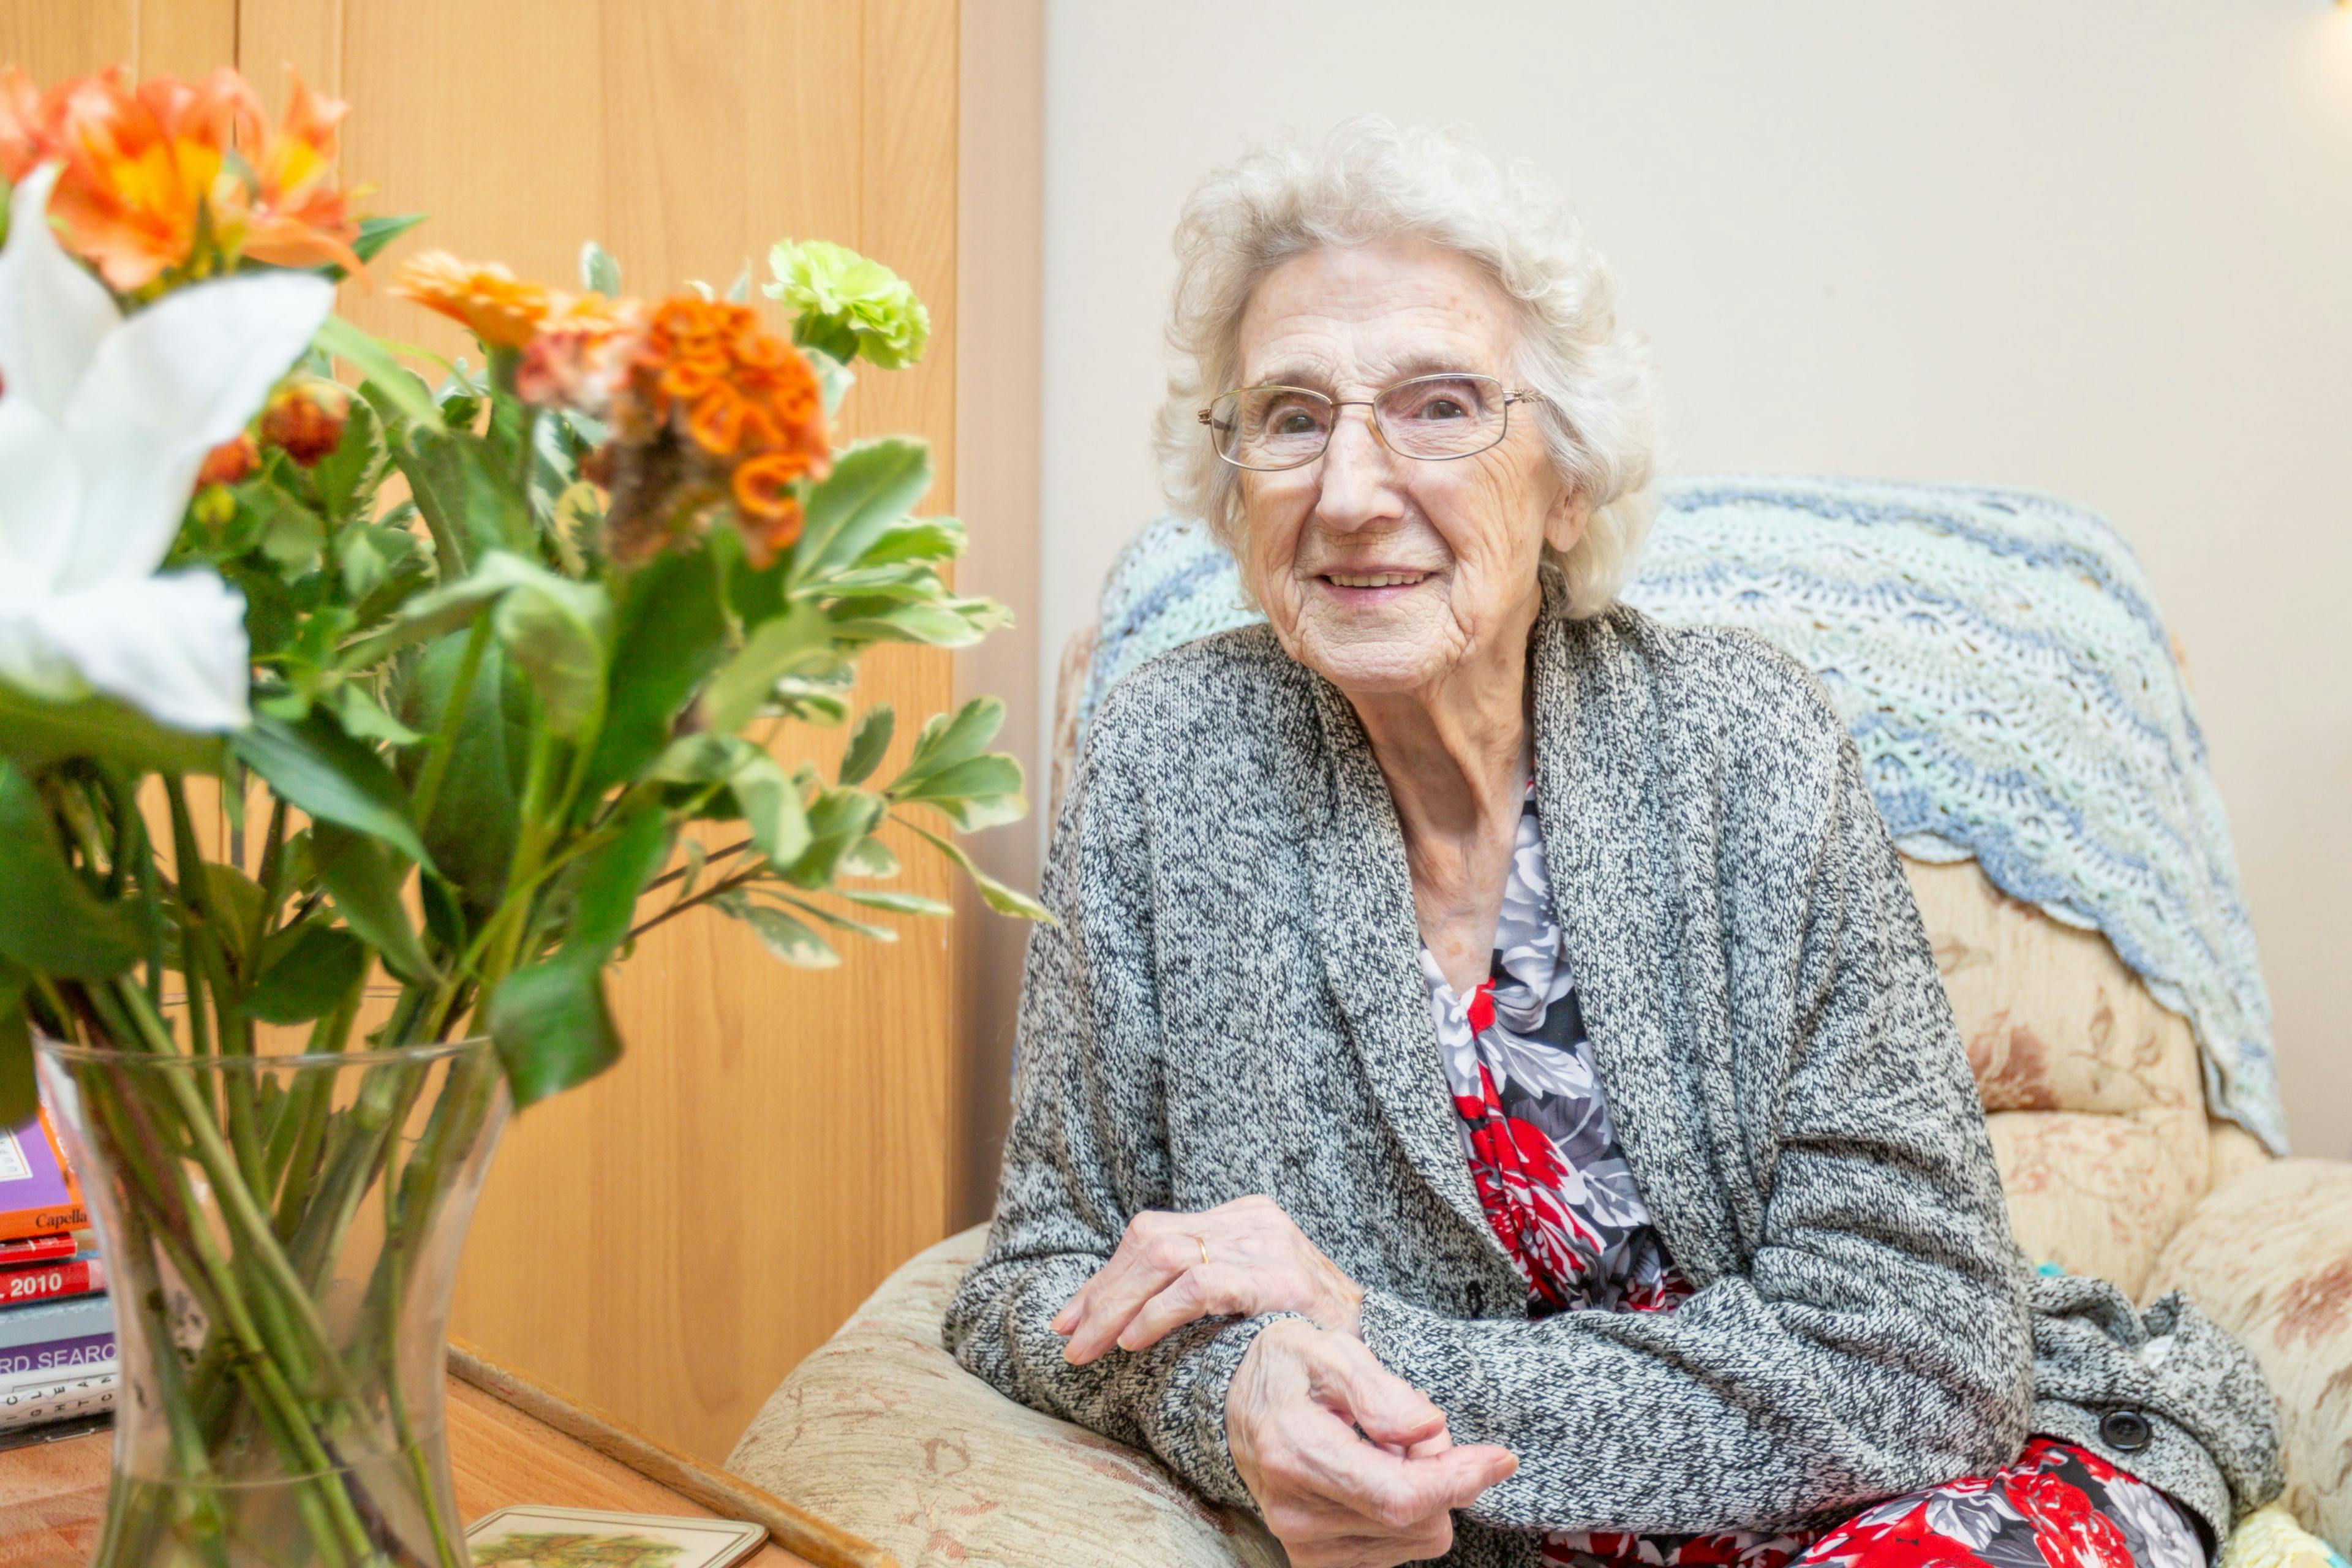 Residents at Glennfield care home in Wisbech, Cambridgeshire